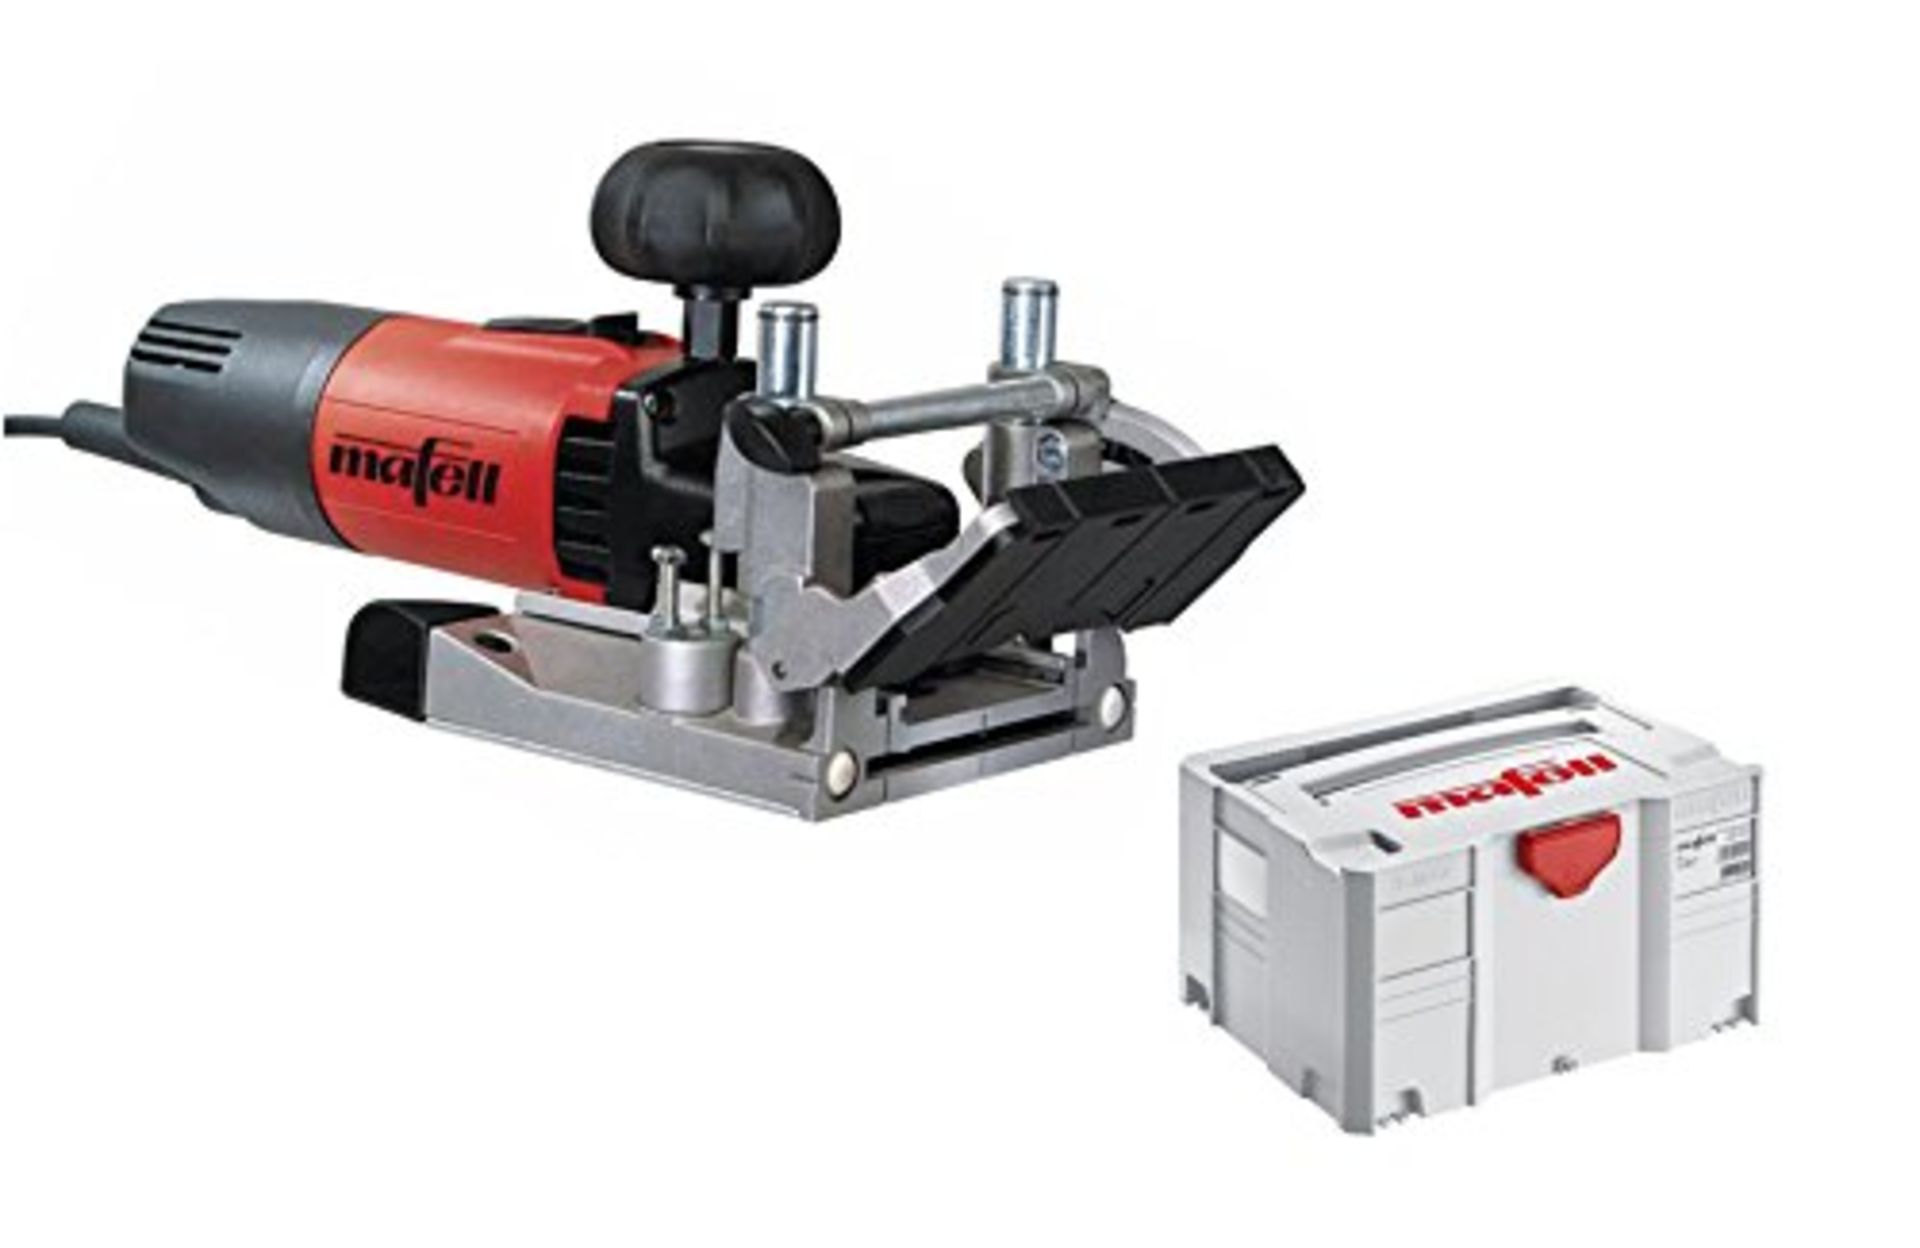 1 x Mafell LNF20 240V Biscuit Jointer in T-MAX Systainer | EAN: 4032689136066 | RRP £548.99